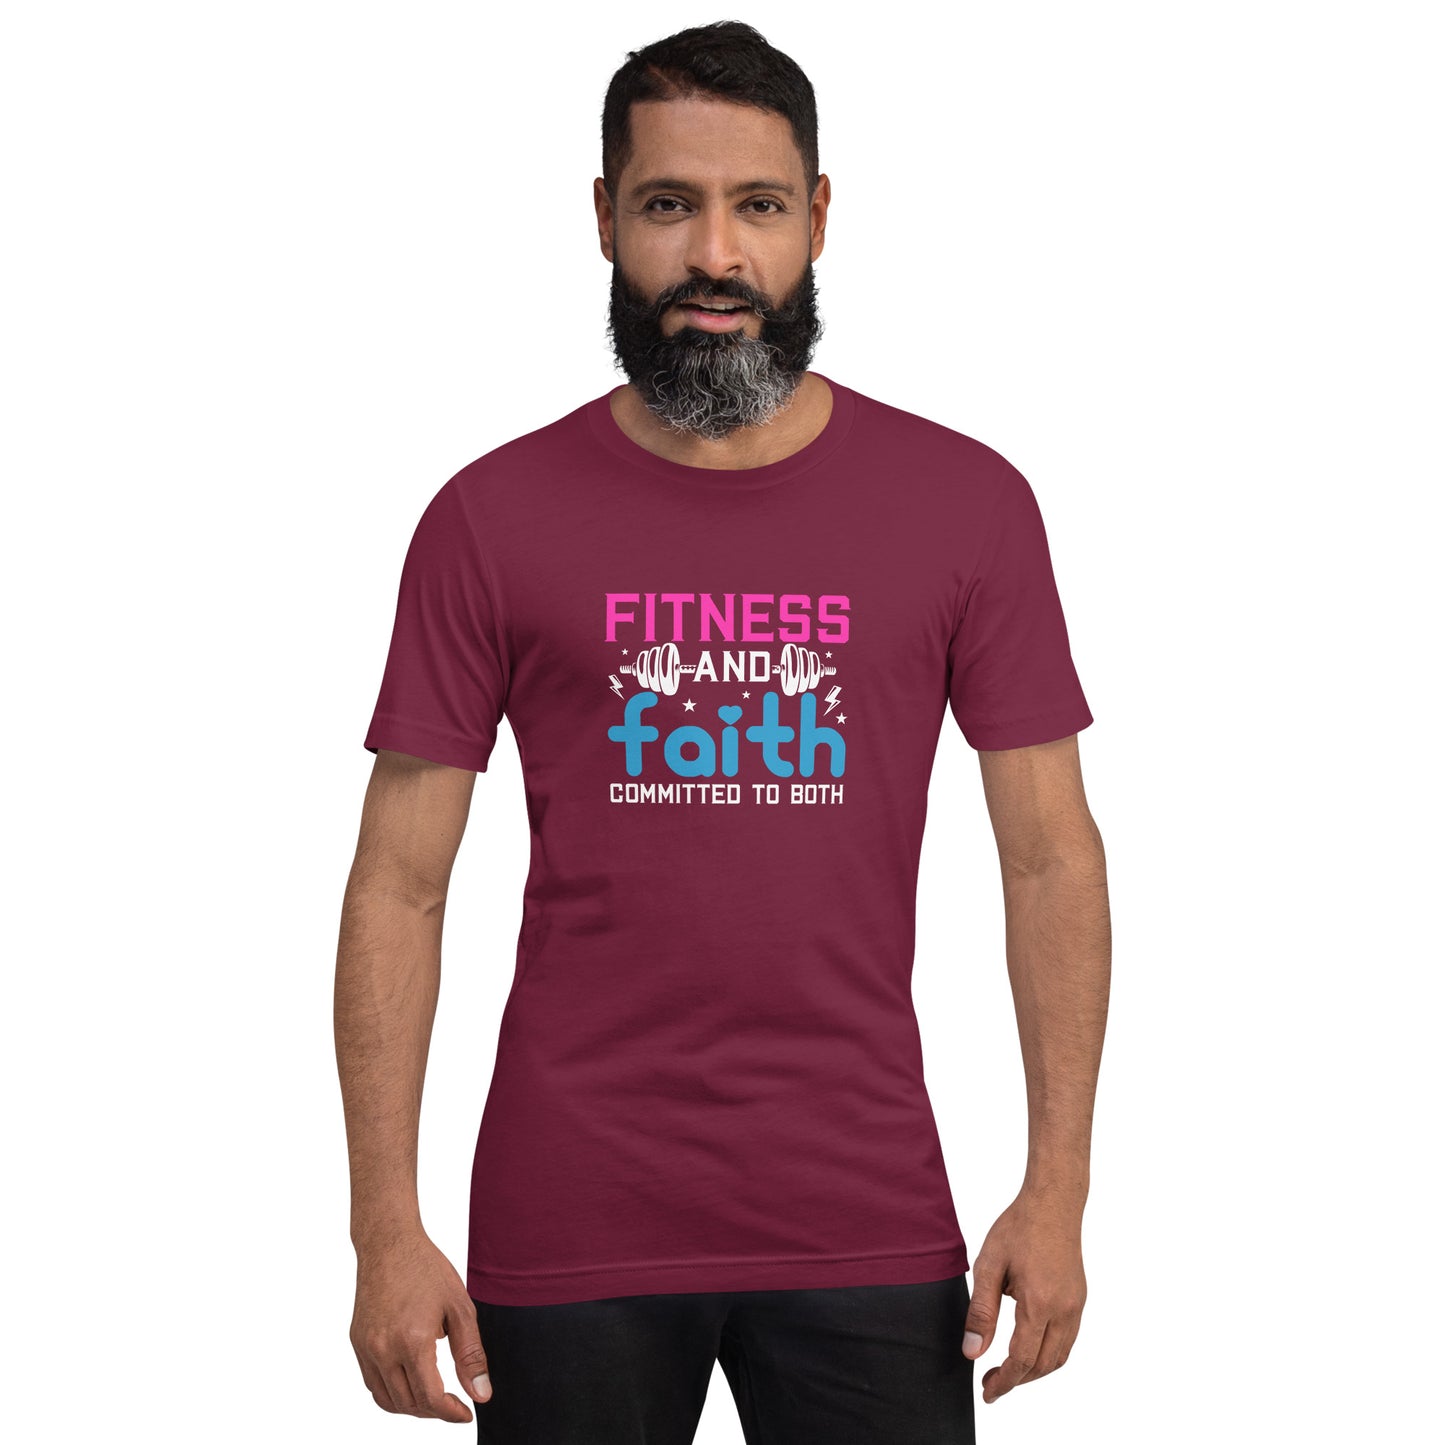 Fitness and Faith Committed to Both Unisex T-shirt